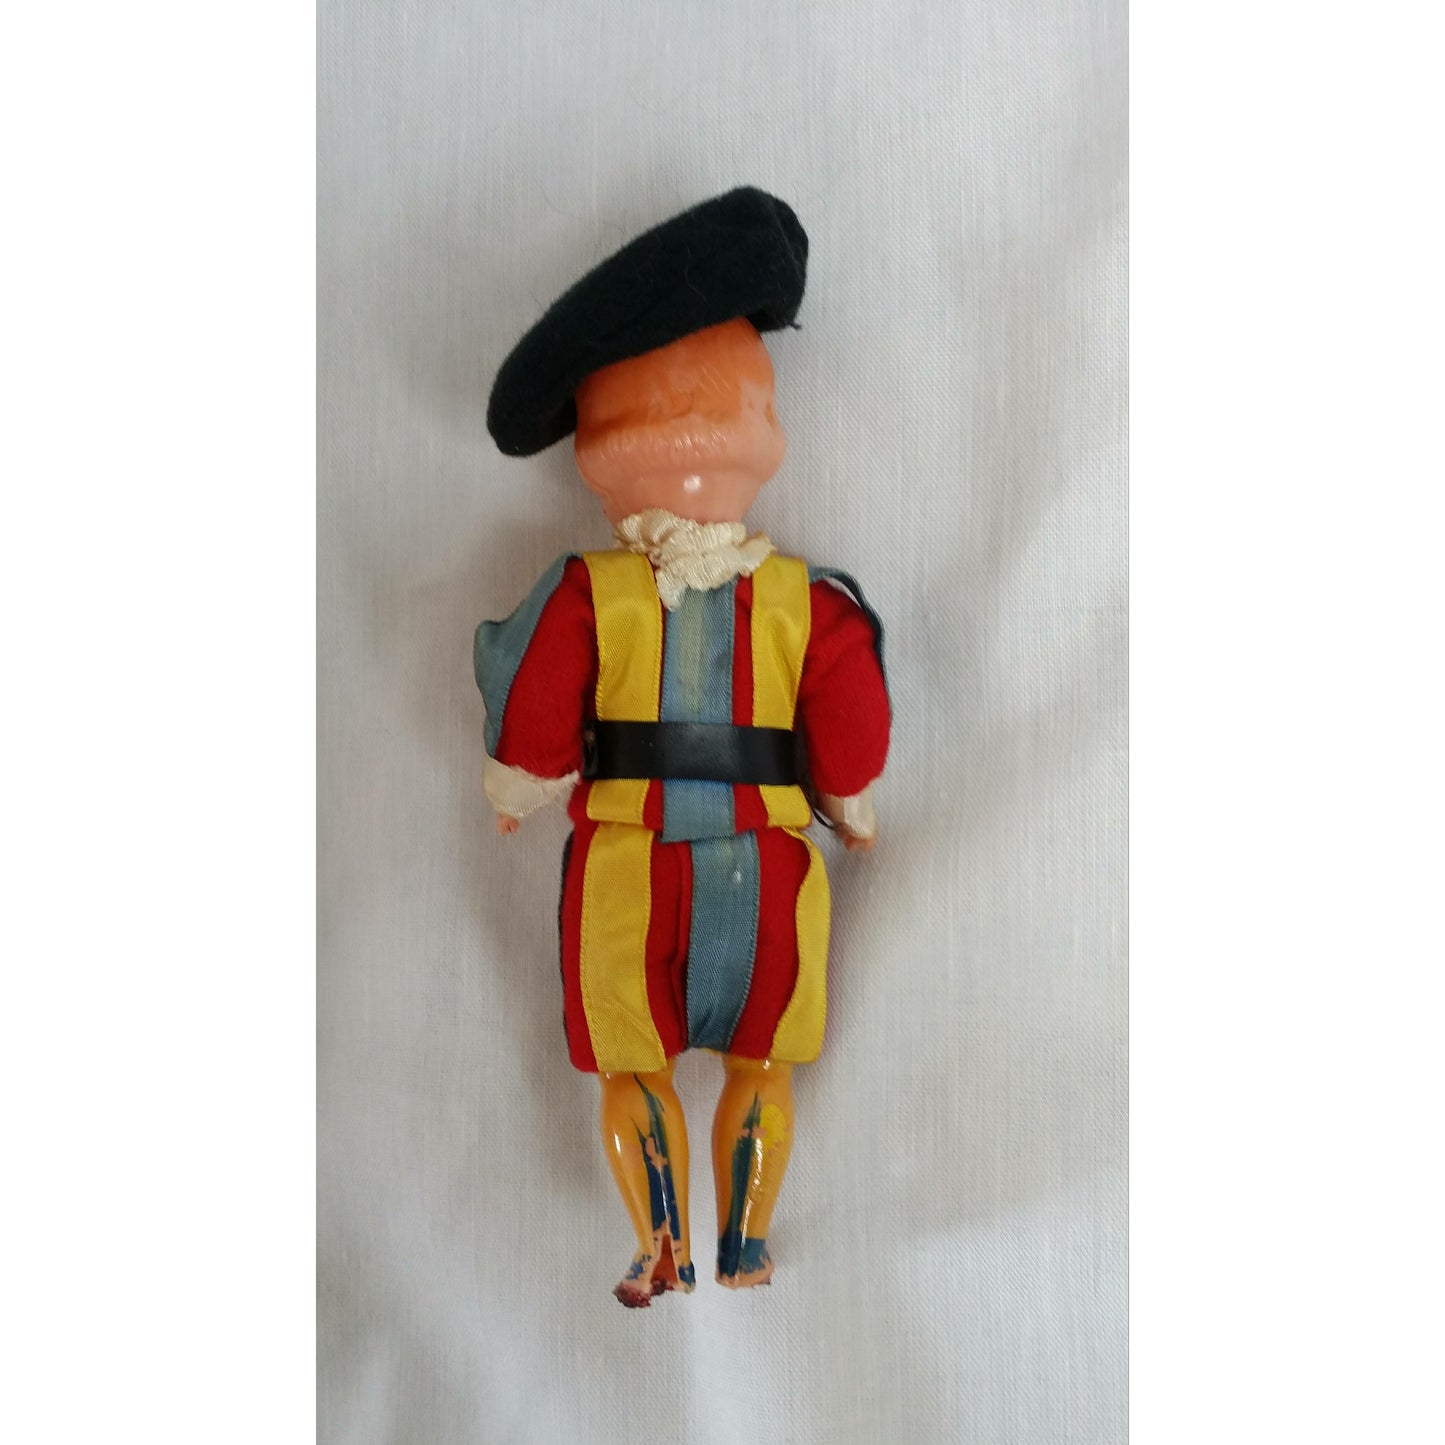 Vatican Guard ~ Hard Plastic Vintage 1950s 6" Inch Celluloid Boy Doll ~ Jointed Arms & Legs ~ Painted Legs ~ Sleepy Eyes